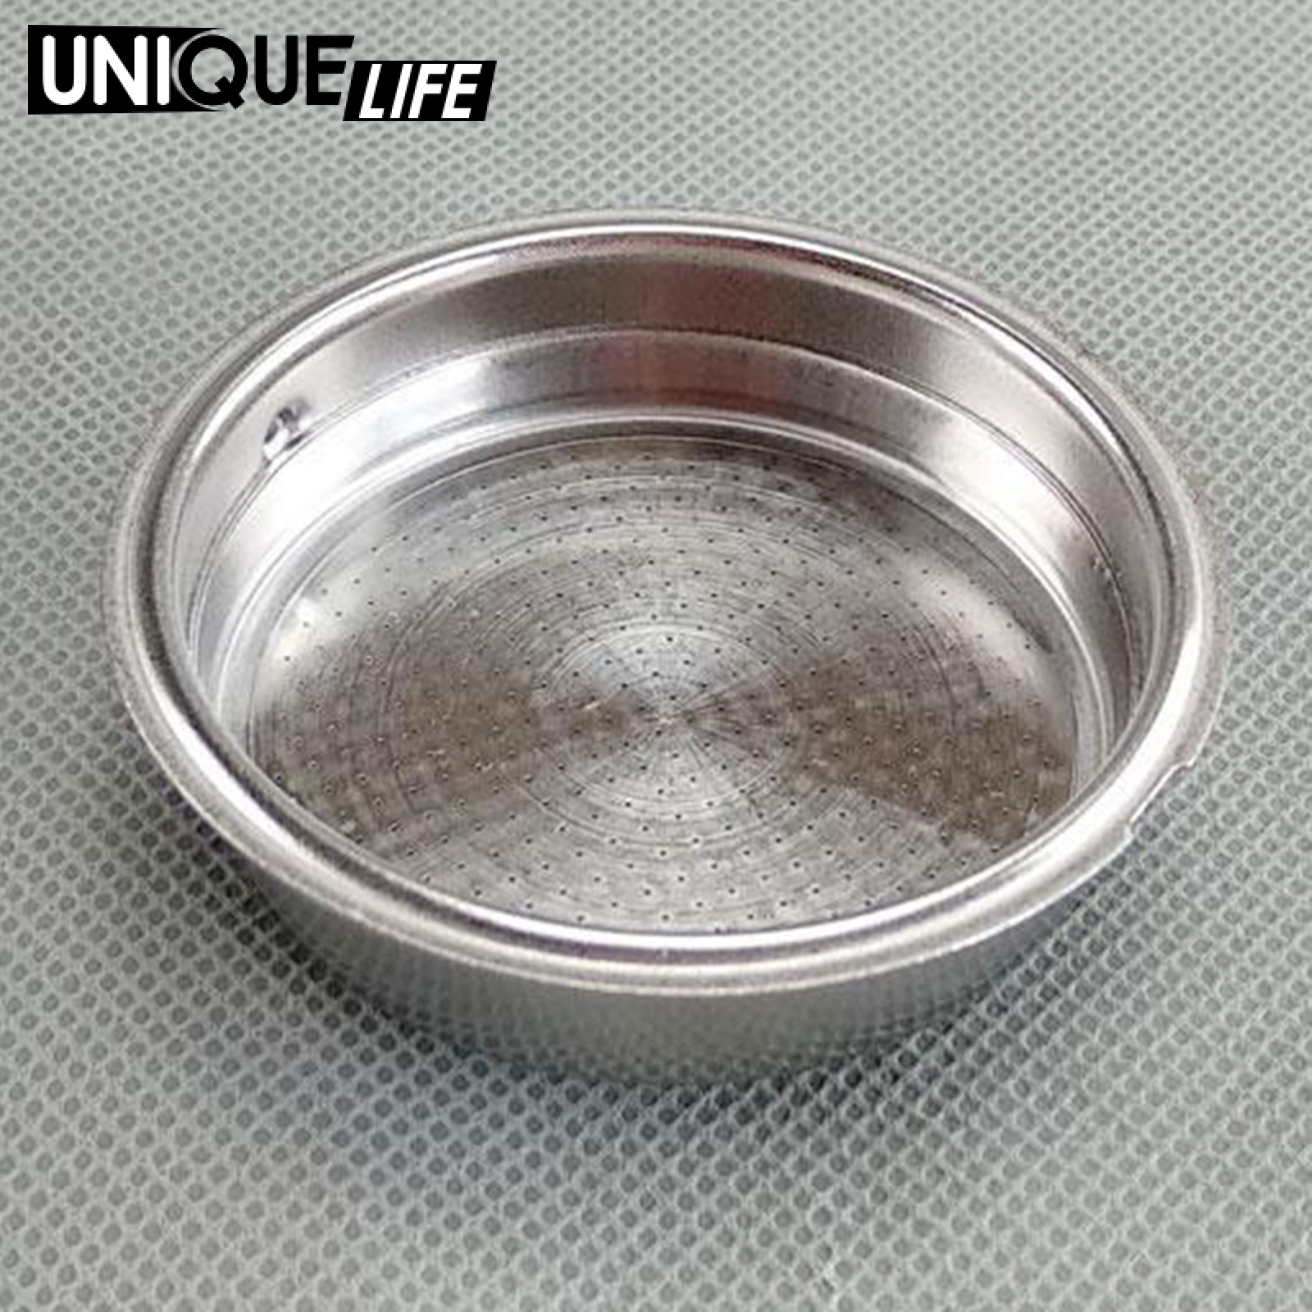 [Unique Life]Stainless Coffee Pressurized Cup Filter Basket 1-2 Cups BPA-Free Powder Bowl